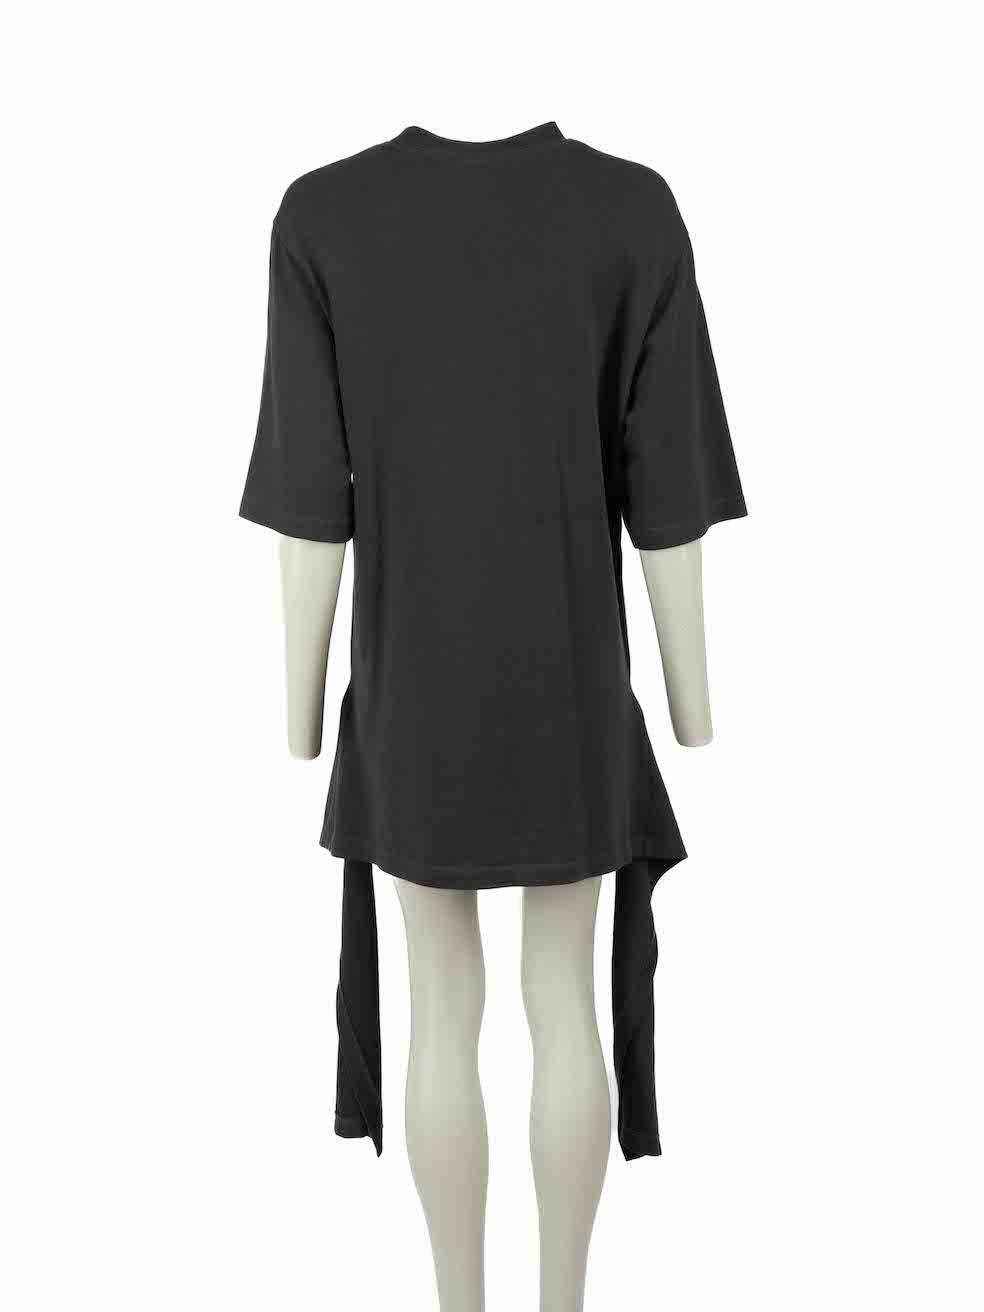 Balenciaga Black Deconstructed Drape Top Size XS In Excellent Condition In London, GB